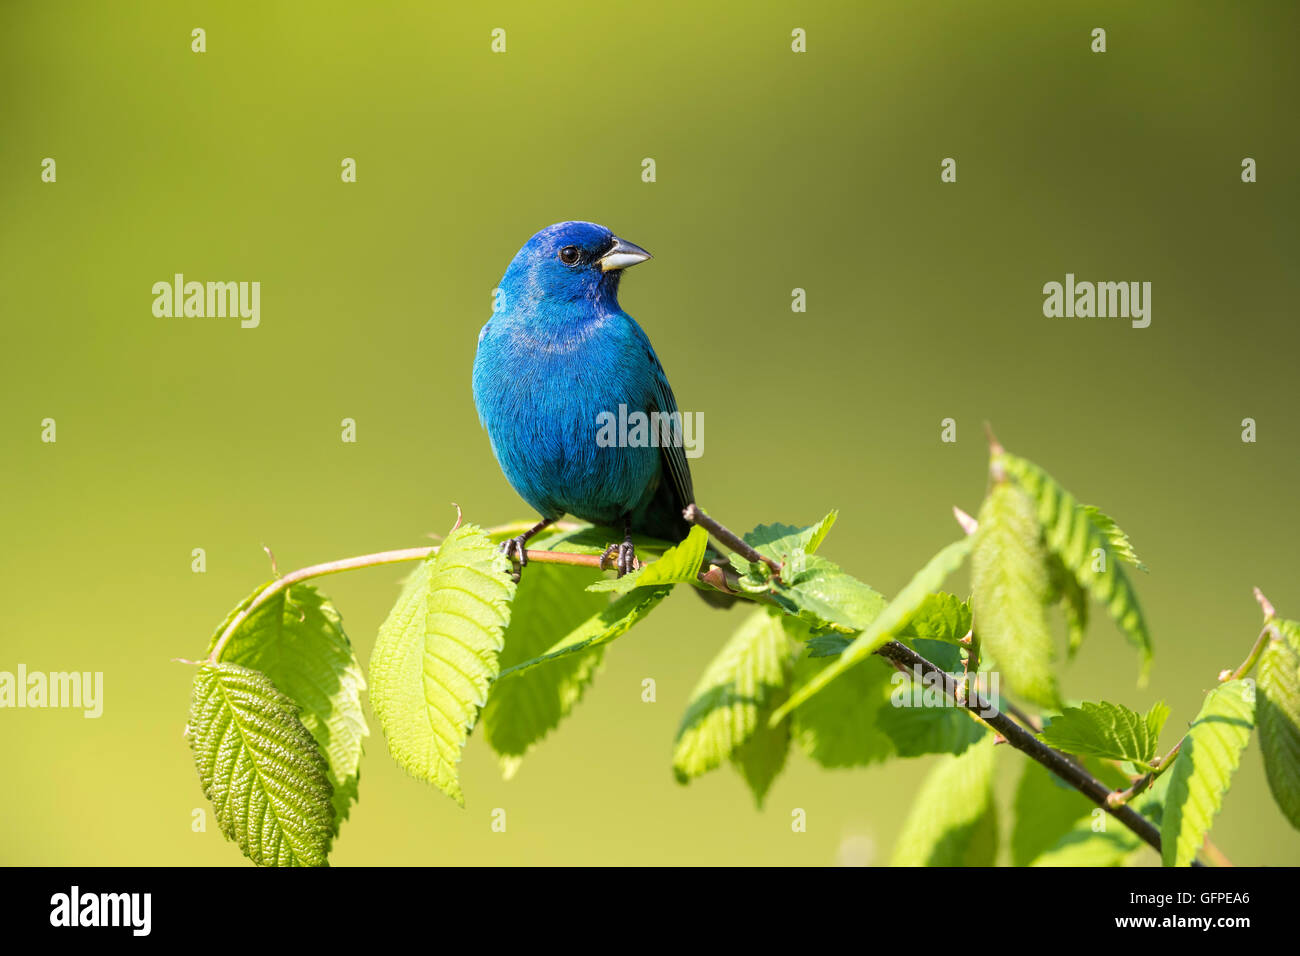 Adult male Indigo Bunting displaying its beautiful blue plumage on a clean green background Stock Photo